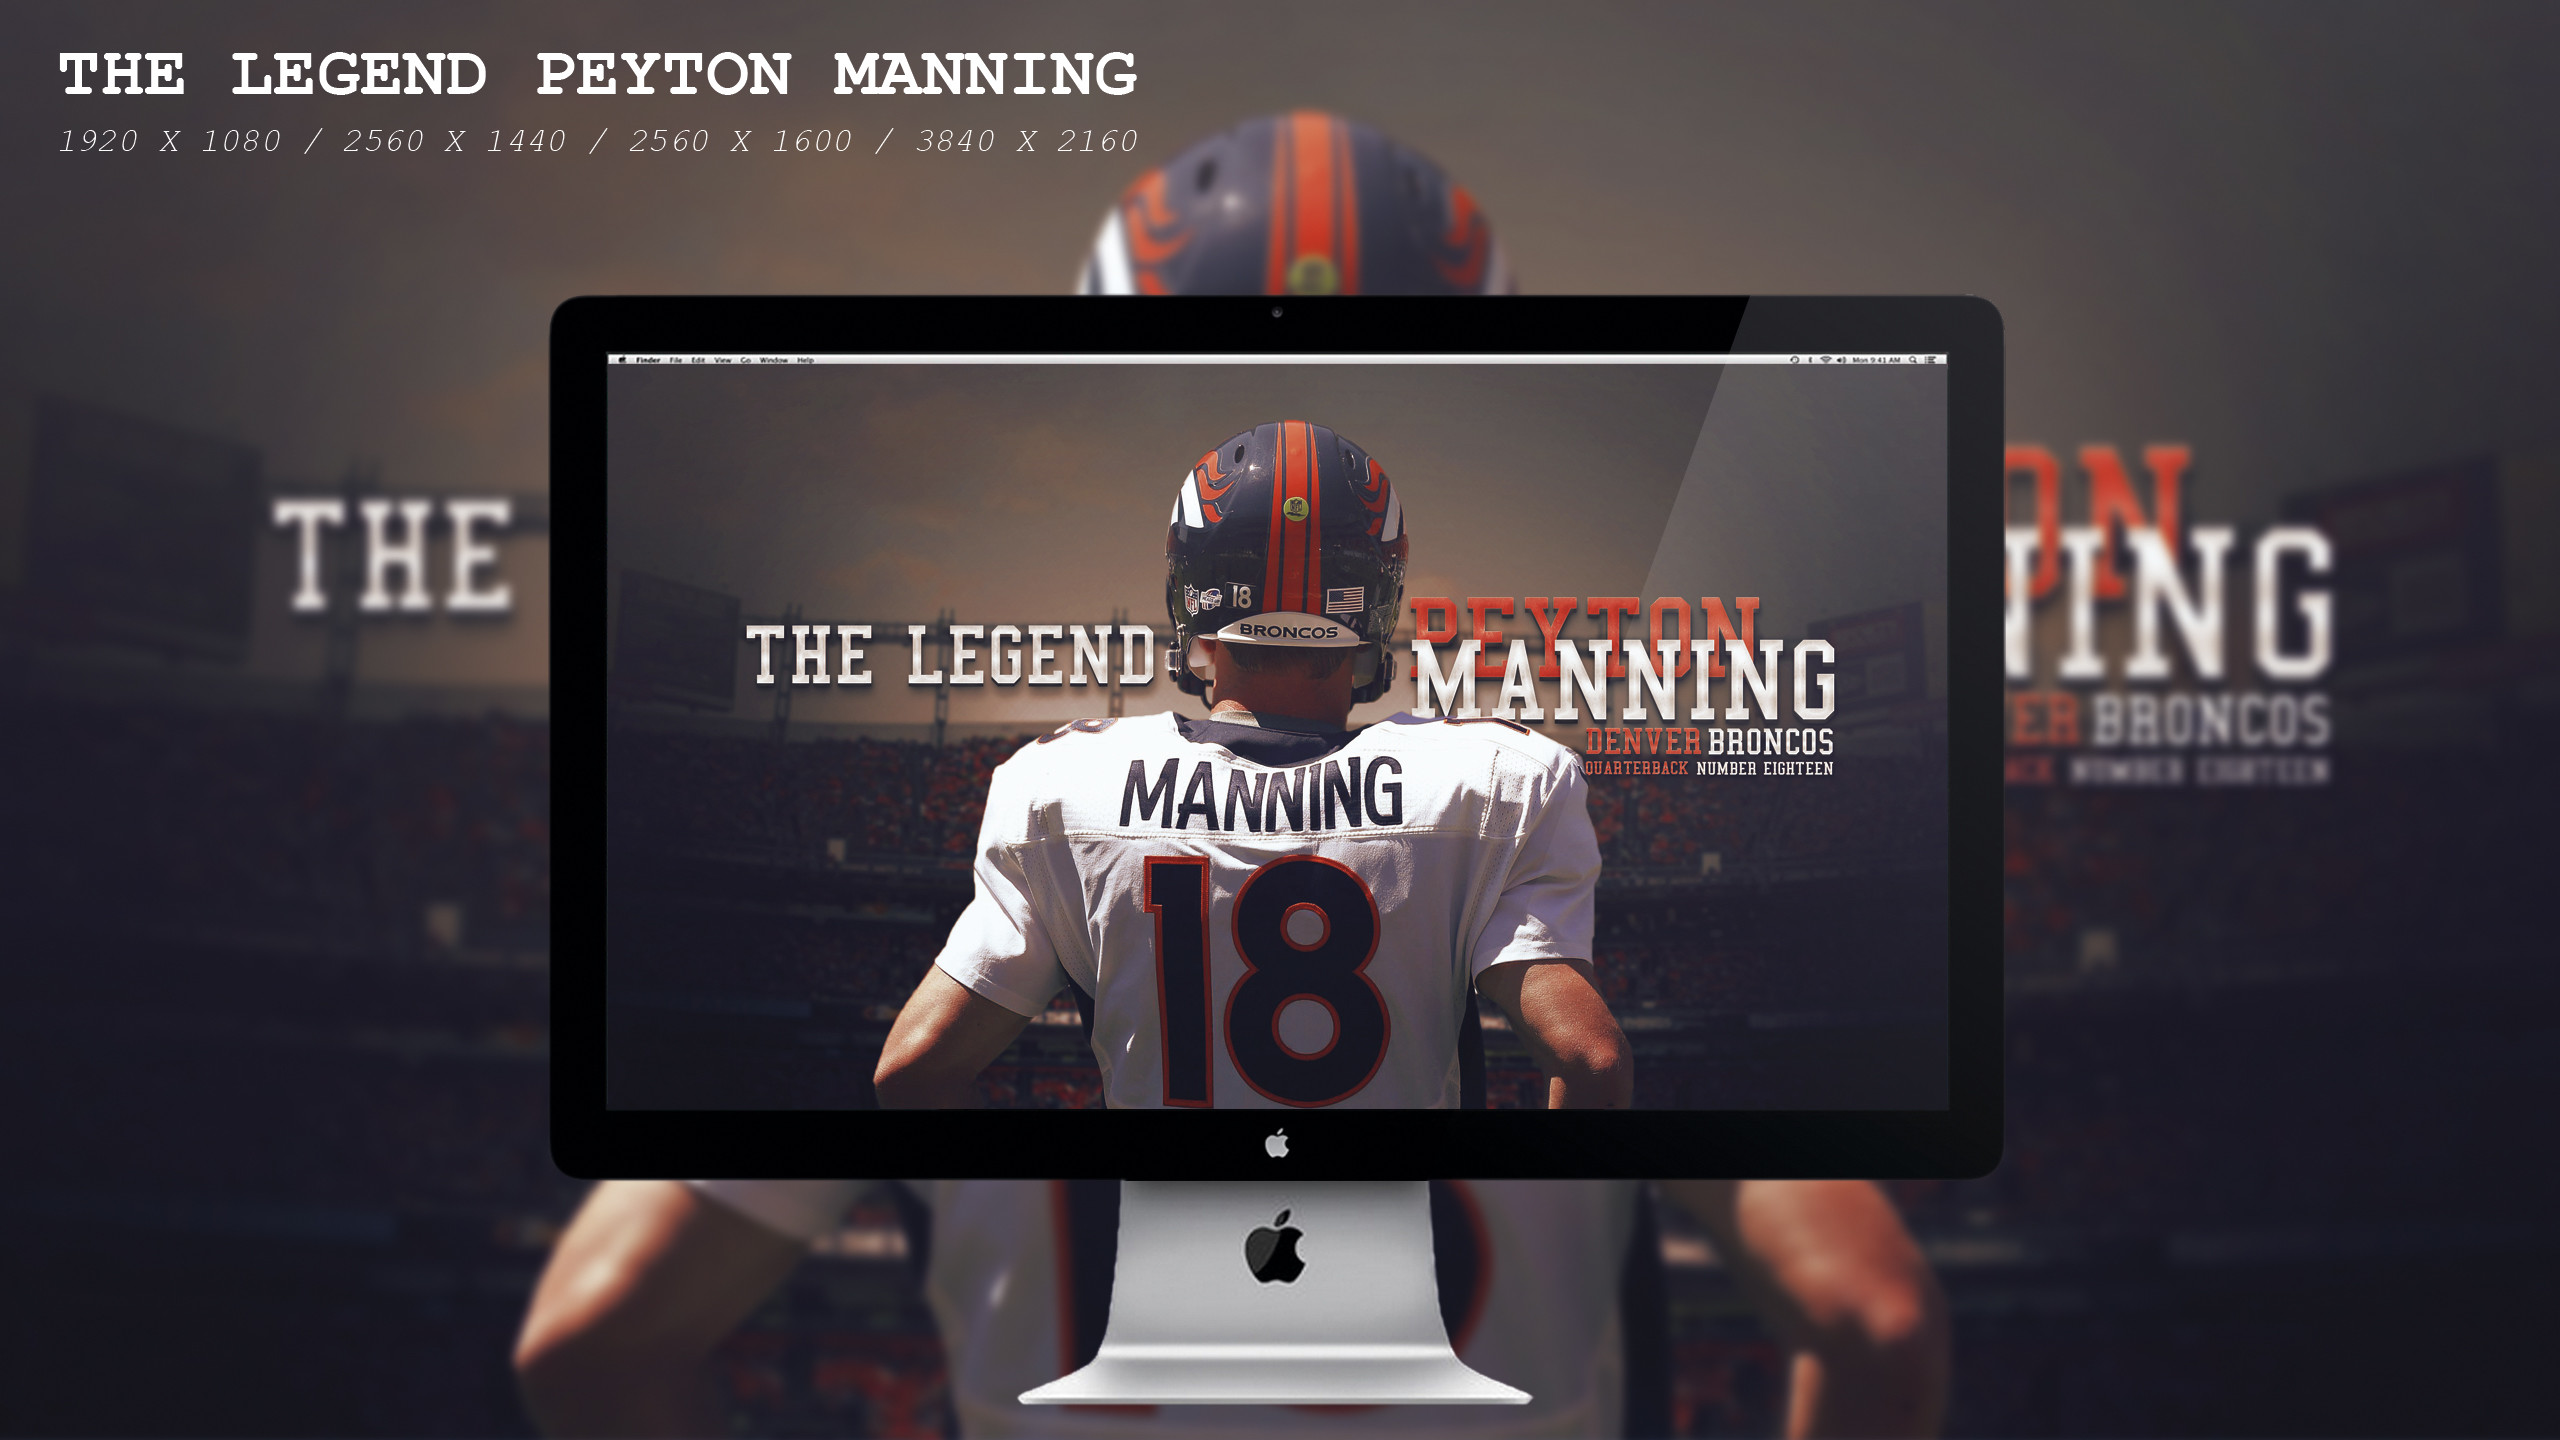 2560x1440 ... The Legend Peyton Manning Wallpaper HD by BeAware8